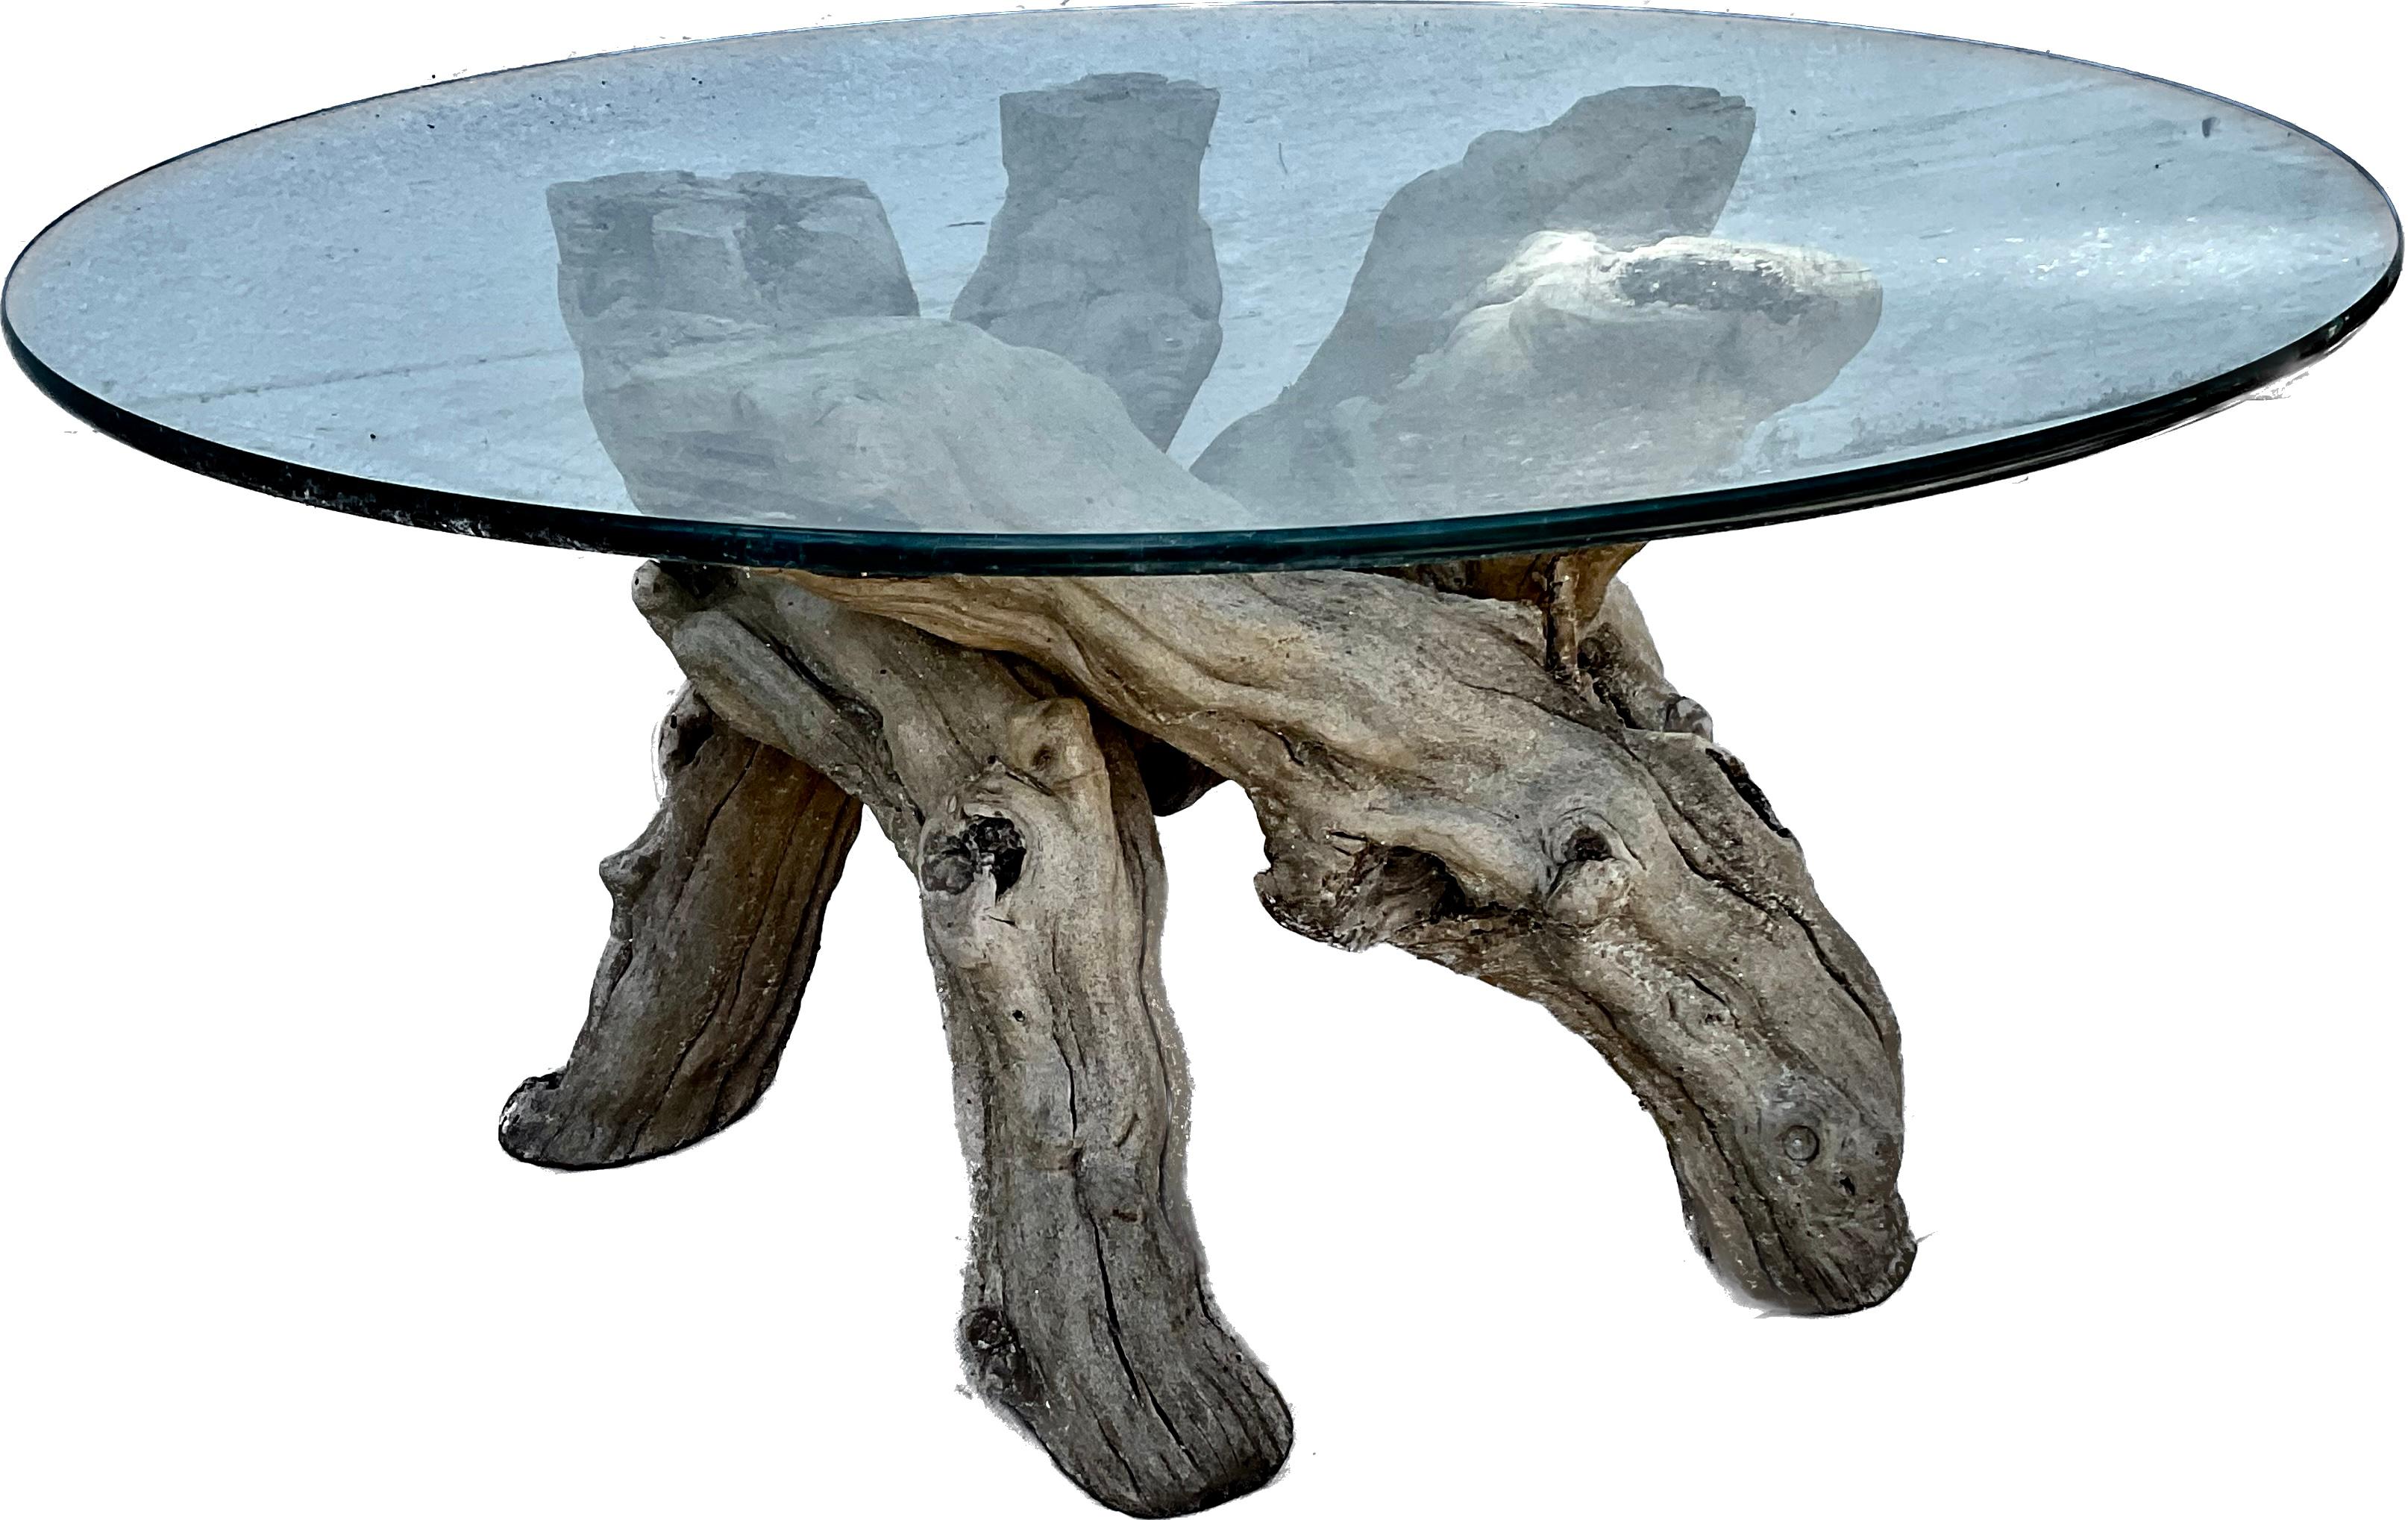 Beautiful vintage organic modern form grape vine base coffee table with circular glass top. Unique design of roots allow top to sit evenly while maintaining the natural look. 